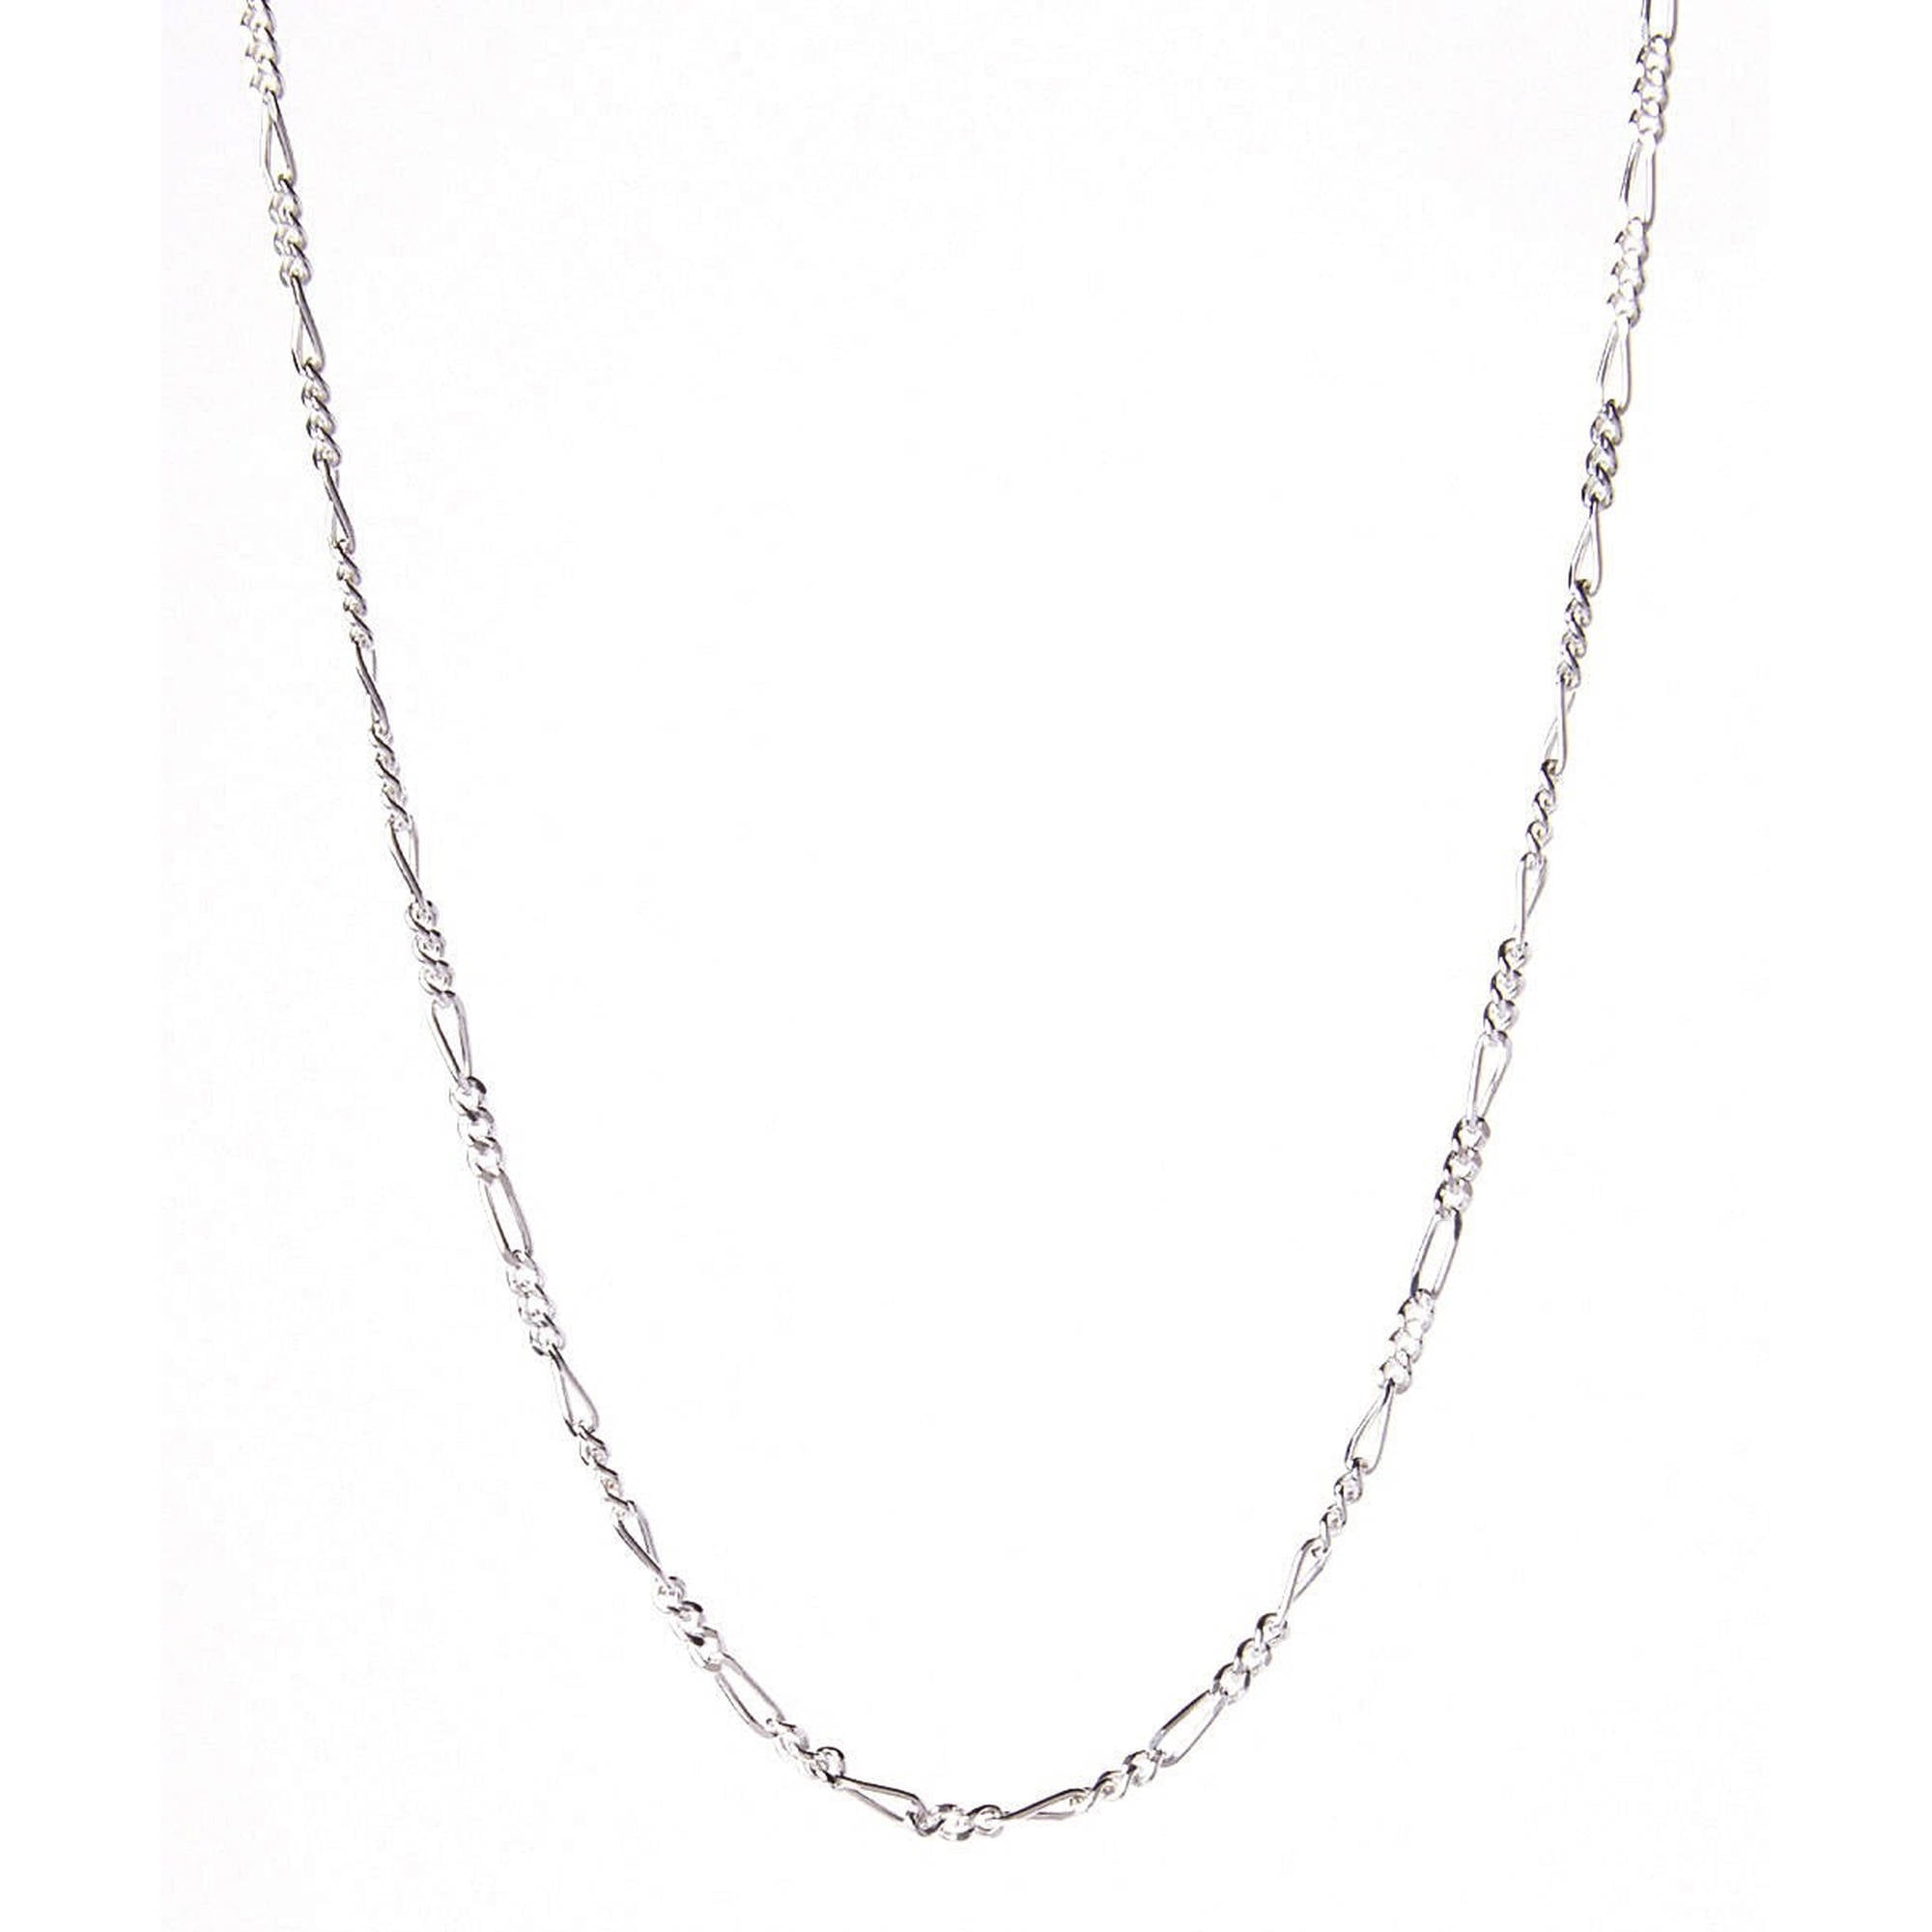 .925 Sterling Silver 2mm Italian Rope Chain Necklace in Lengths 16-30